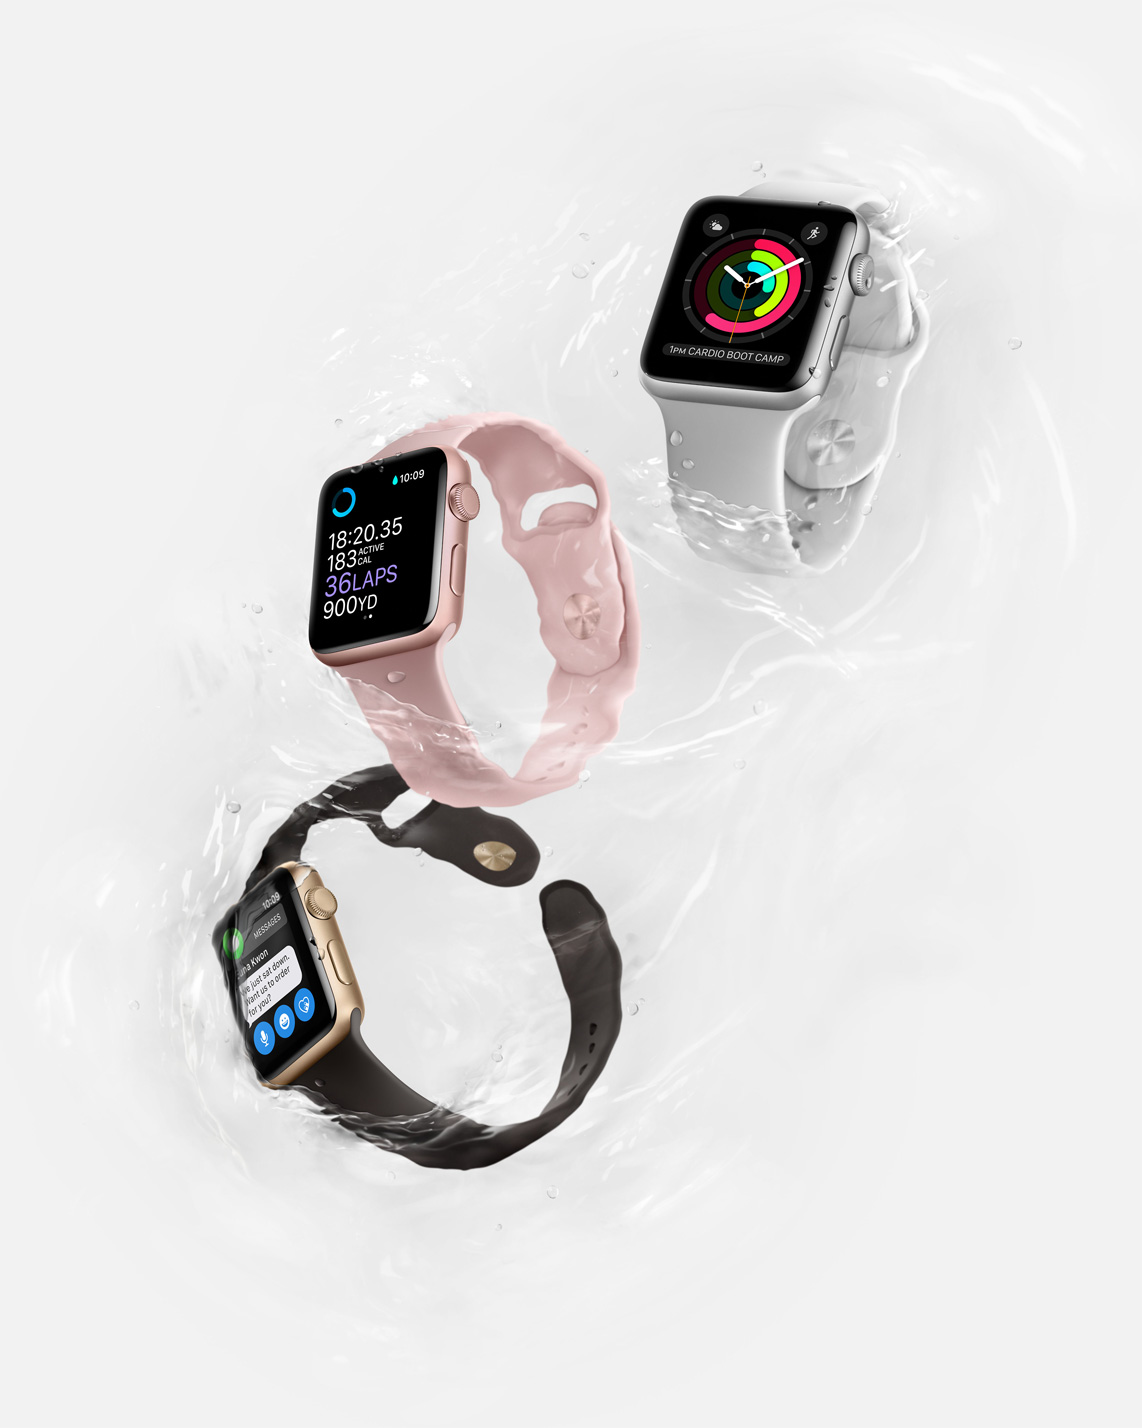 Apple Officially Unveils Waterproof &#039;Apple Watch Series 2&#039; With Built-In GPS, Brighter Display, More